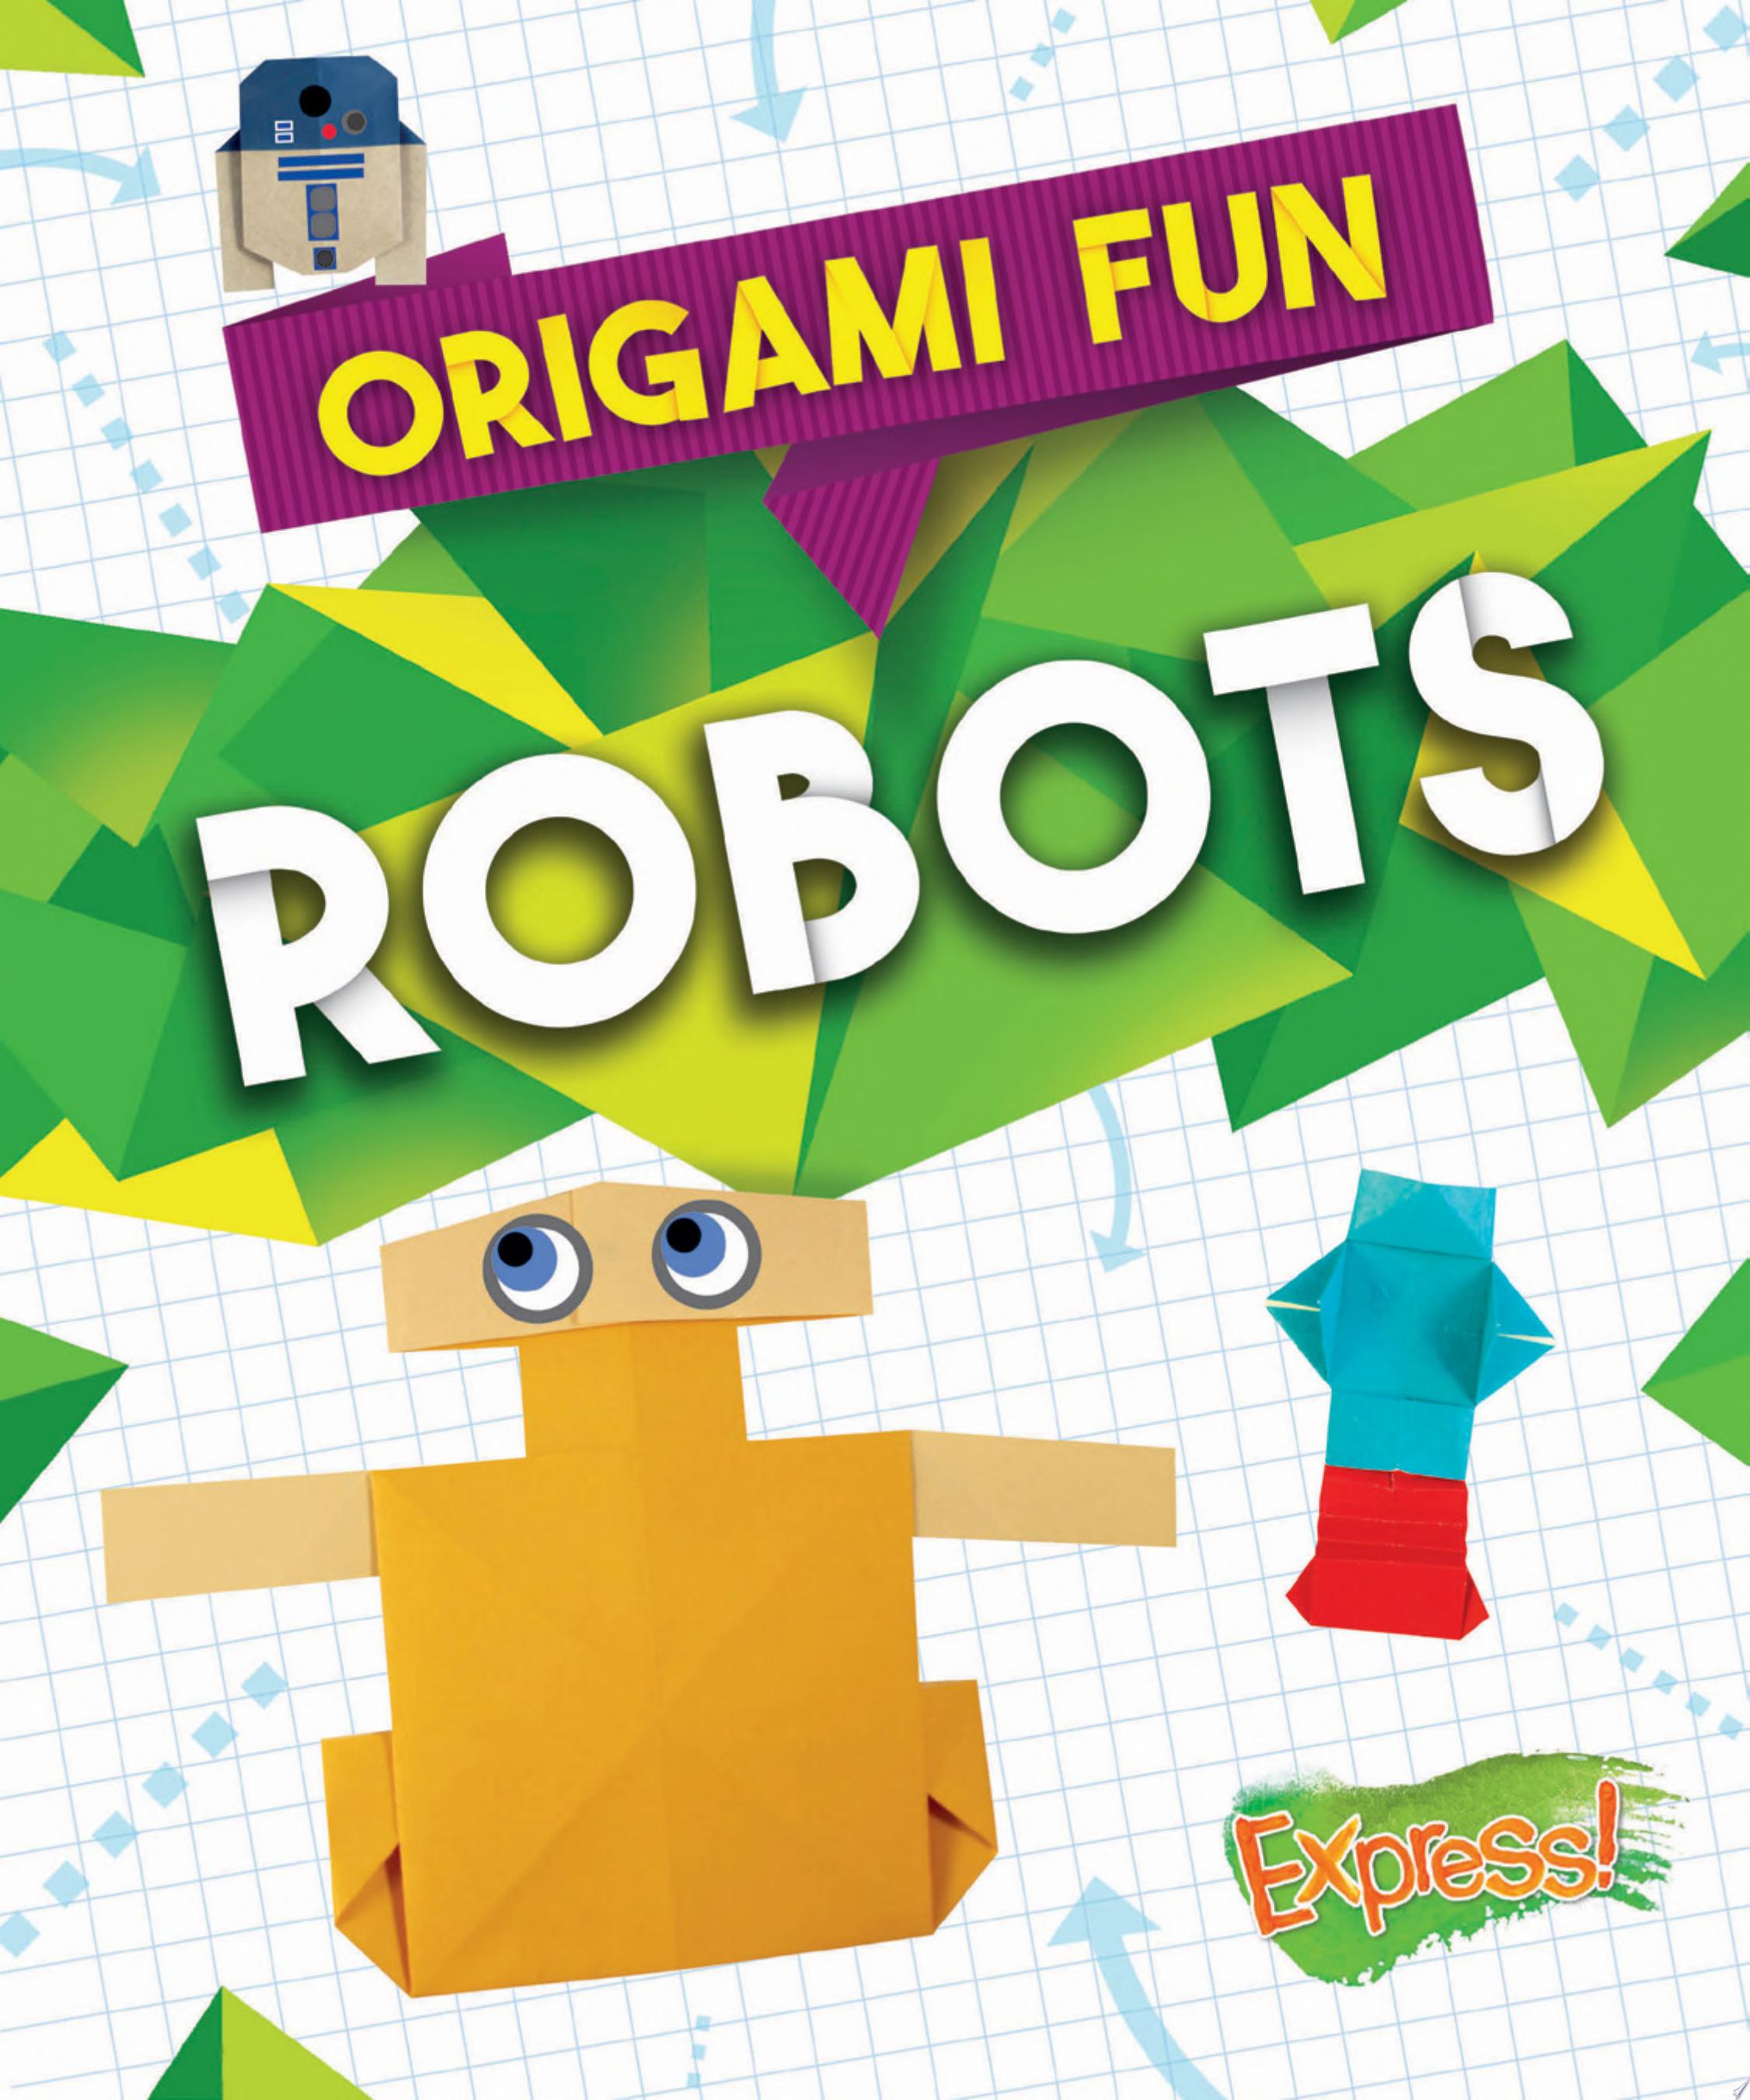 Image for "Origami Fun: Robots"